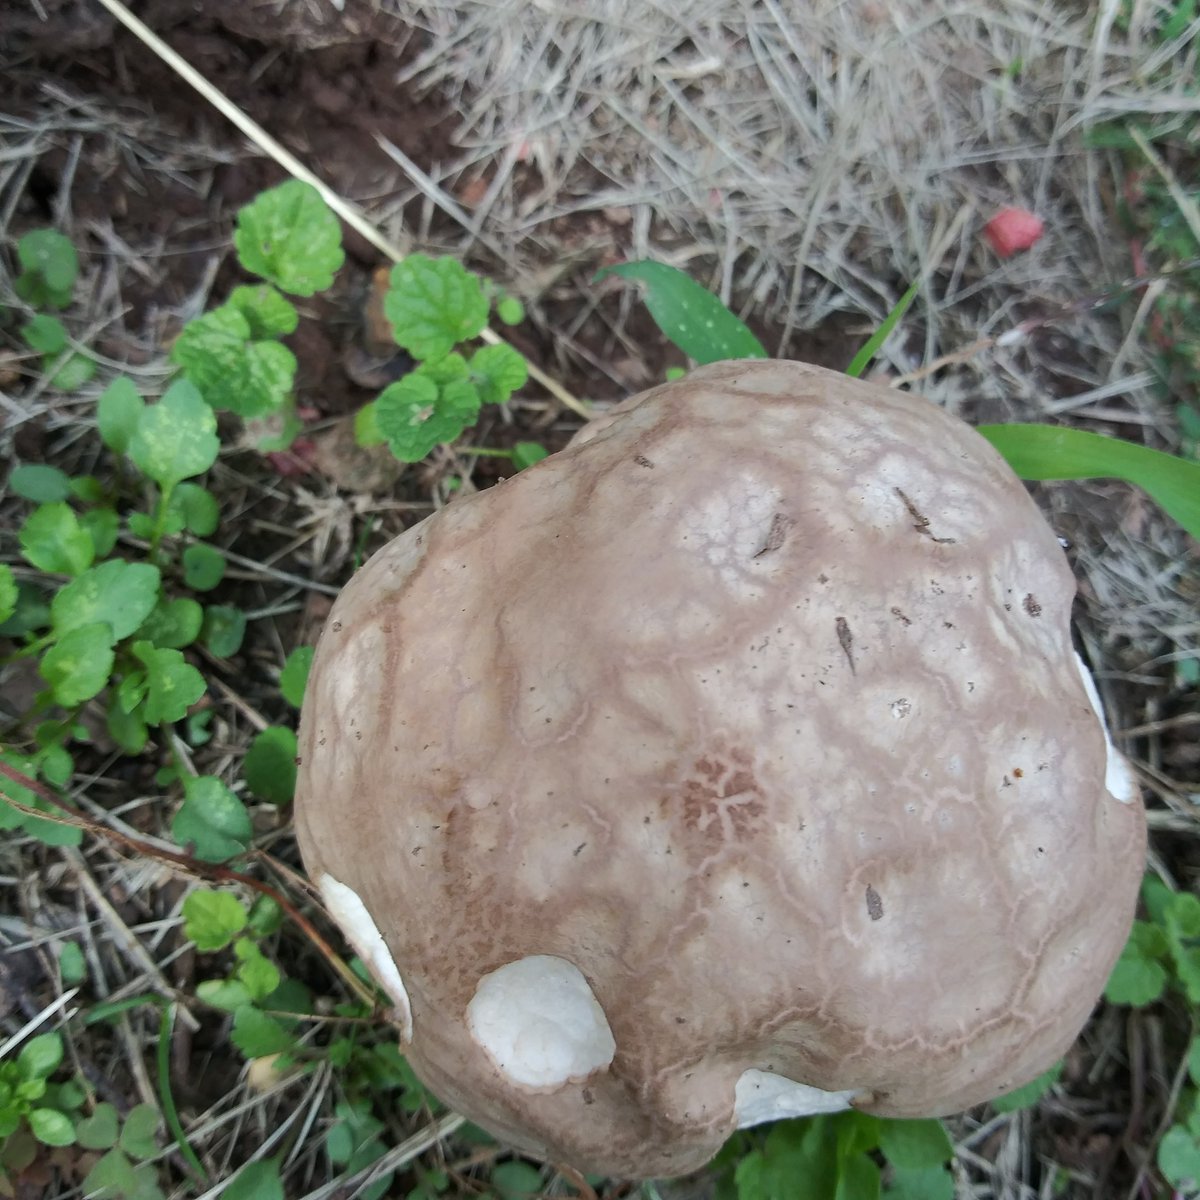 Also a brain seems to be growing in the yard.